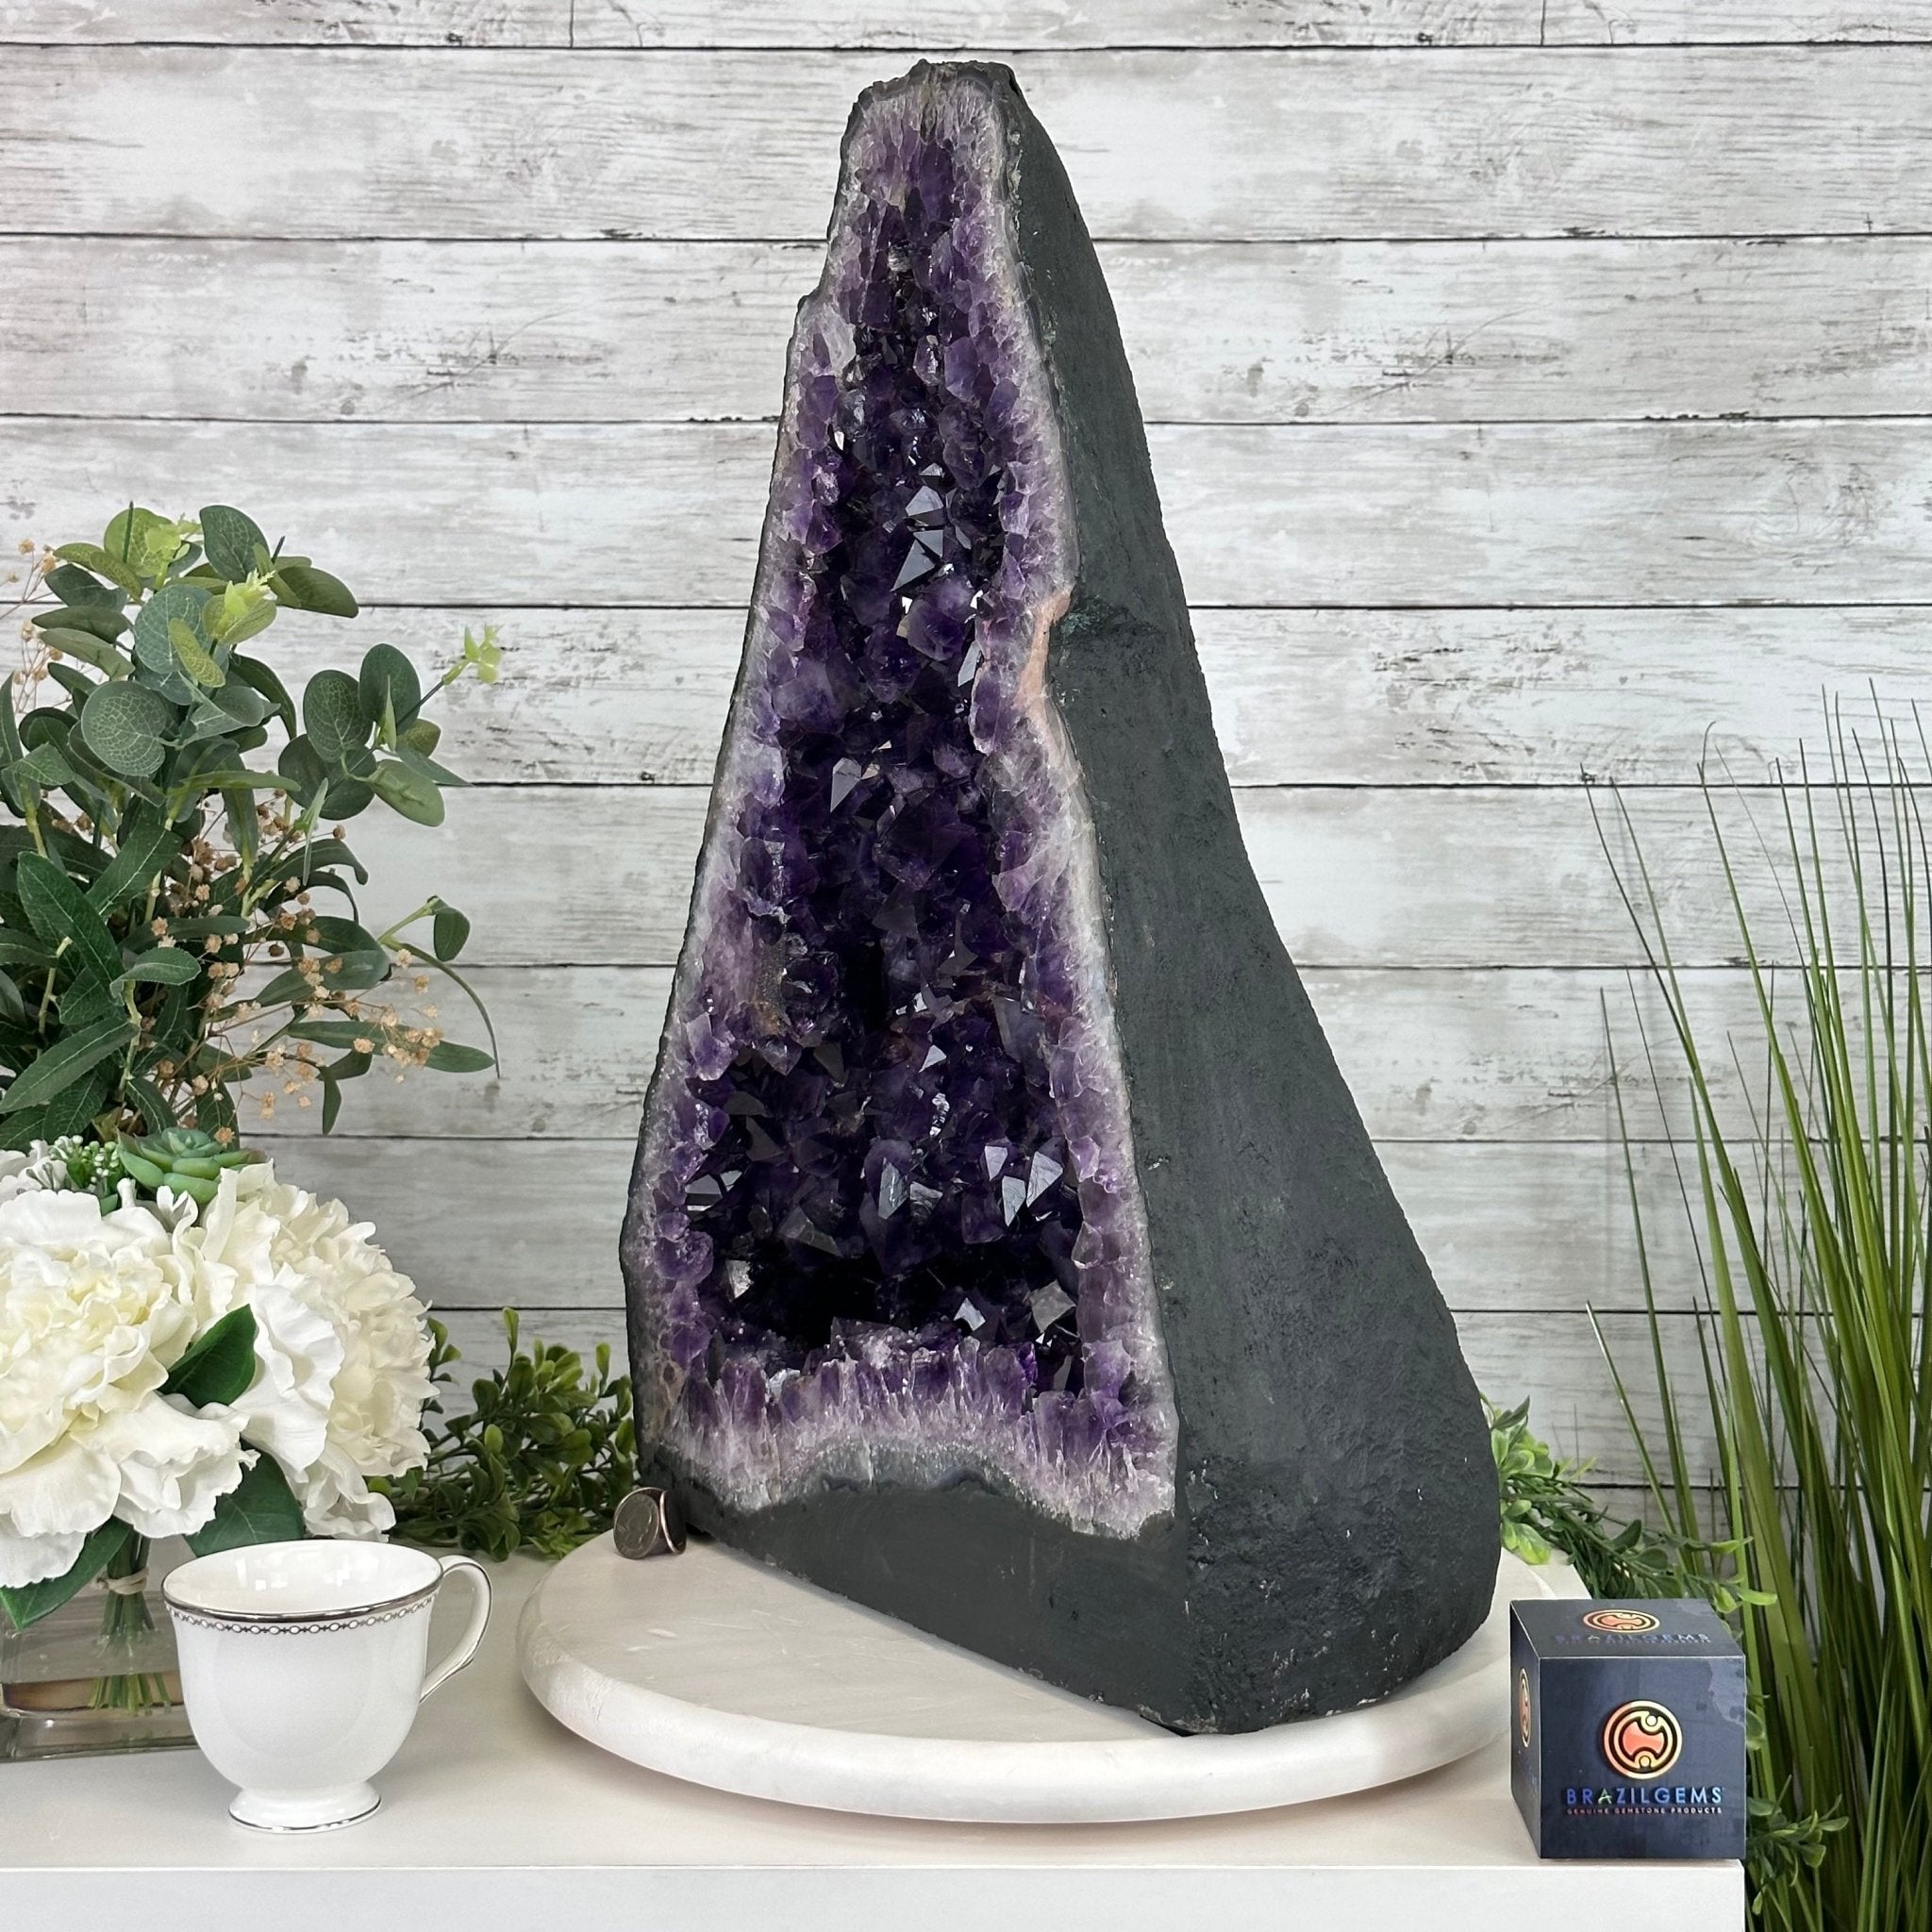 Extra Plus Quality Brazilian Amethyst Cathedral, 74.4 lbs & 21" Tall, Model #5601-0885 by Brazil Gems - Brazil GemsBrazil GemsExtra Plus Quality Brazilian Amethyst Cathedral, 74.4 lbs & 21" Tall, Model #5601-0885 by Brazil GemsCathedrals5601-0885